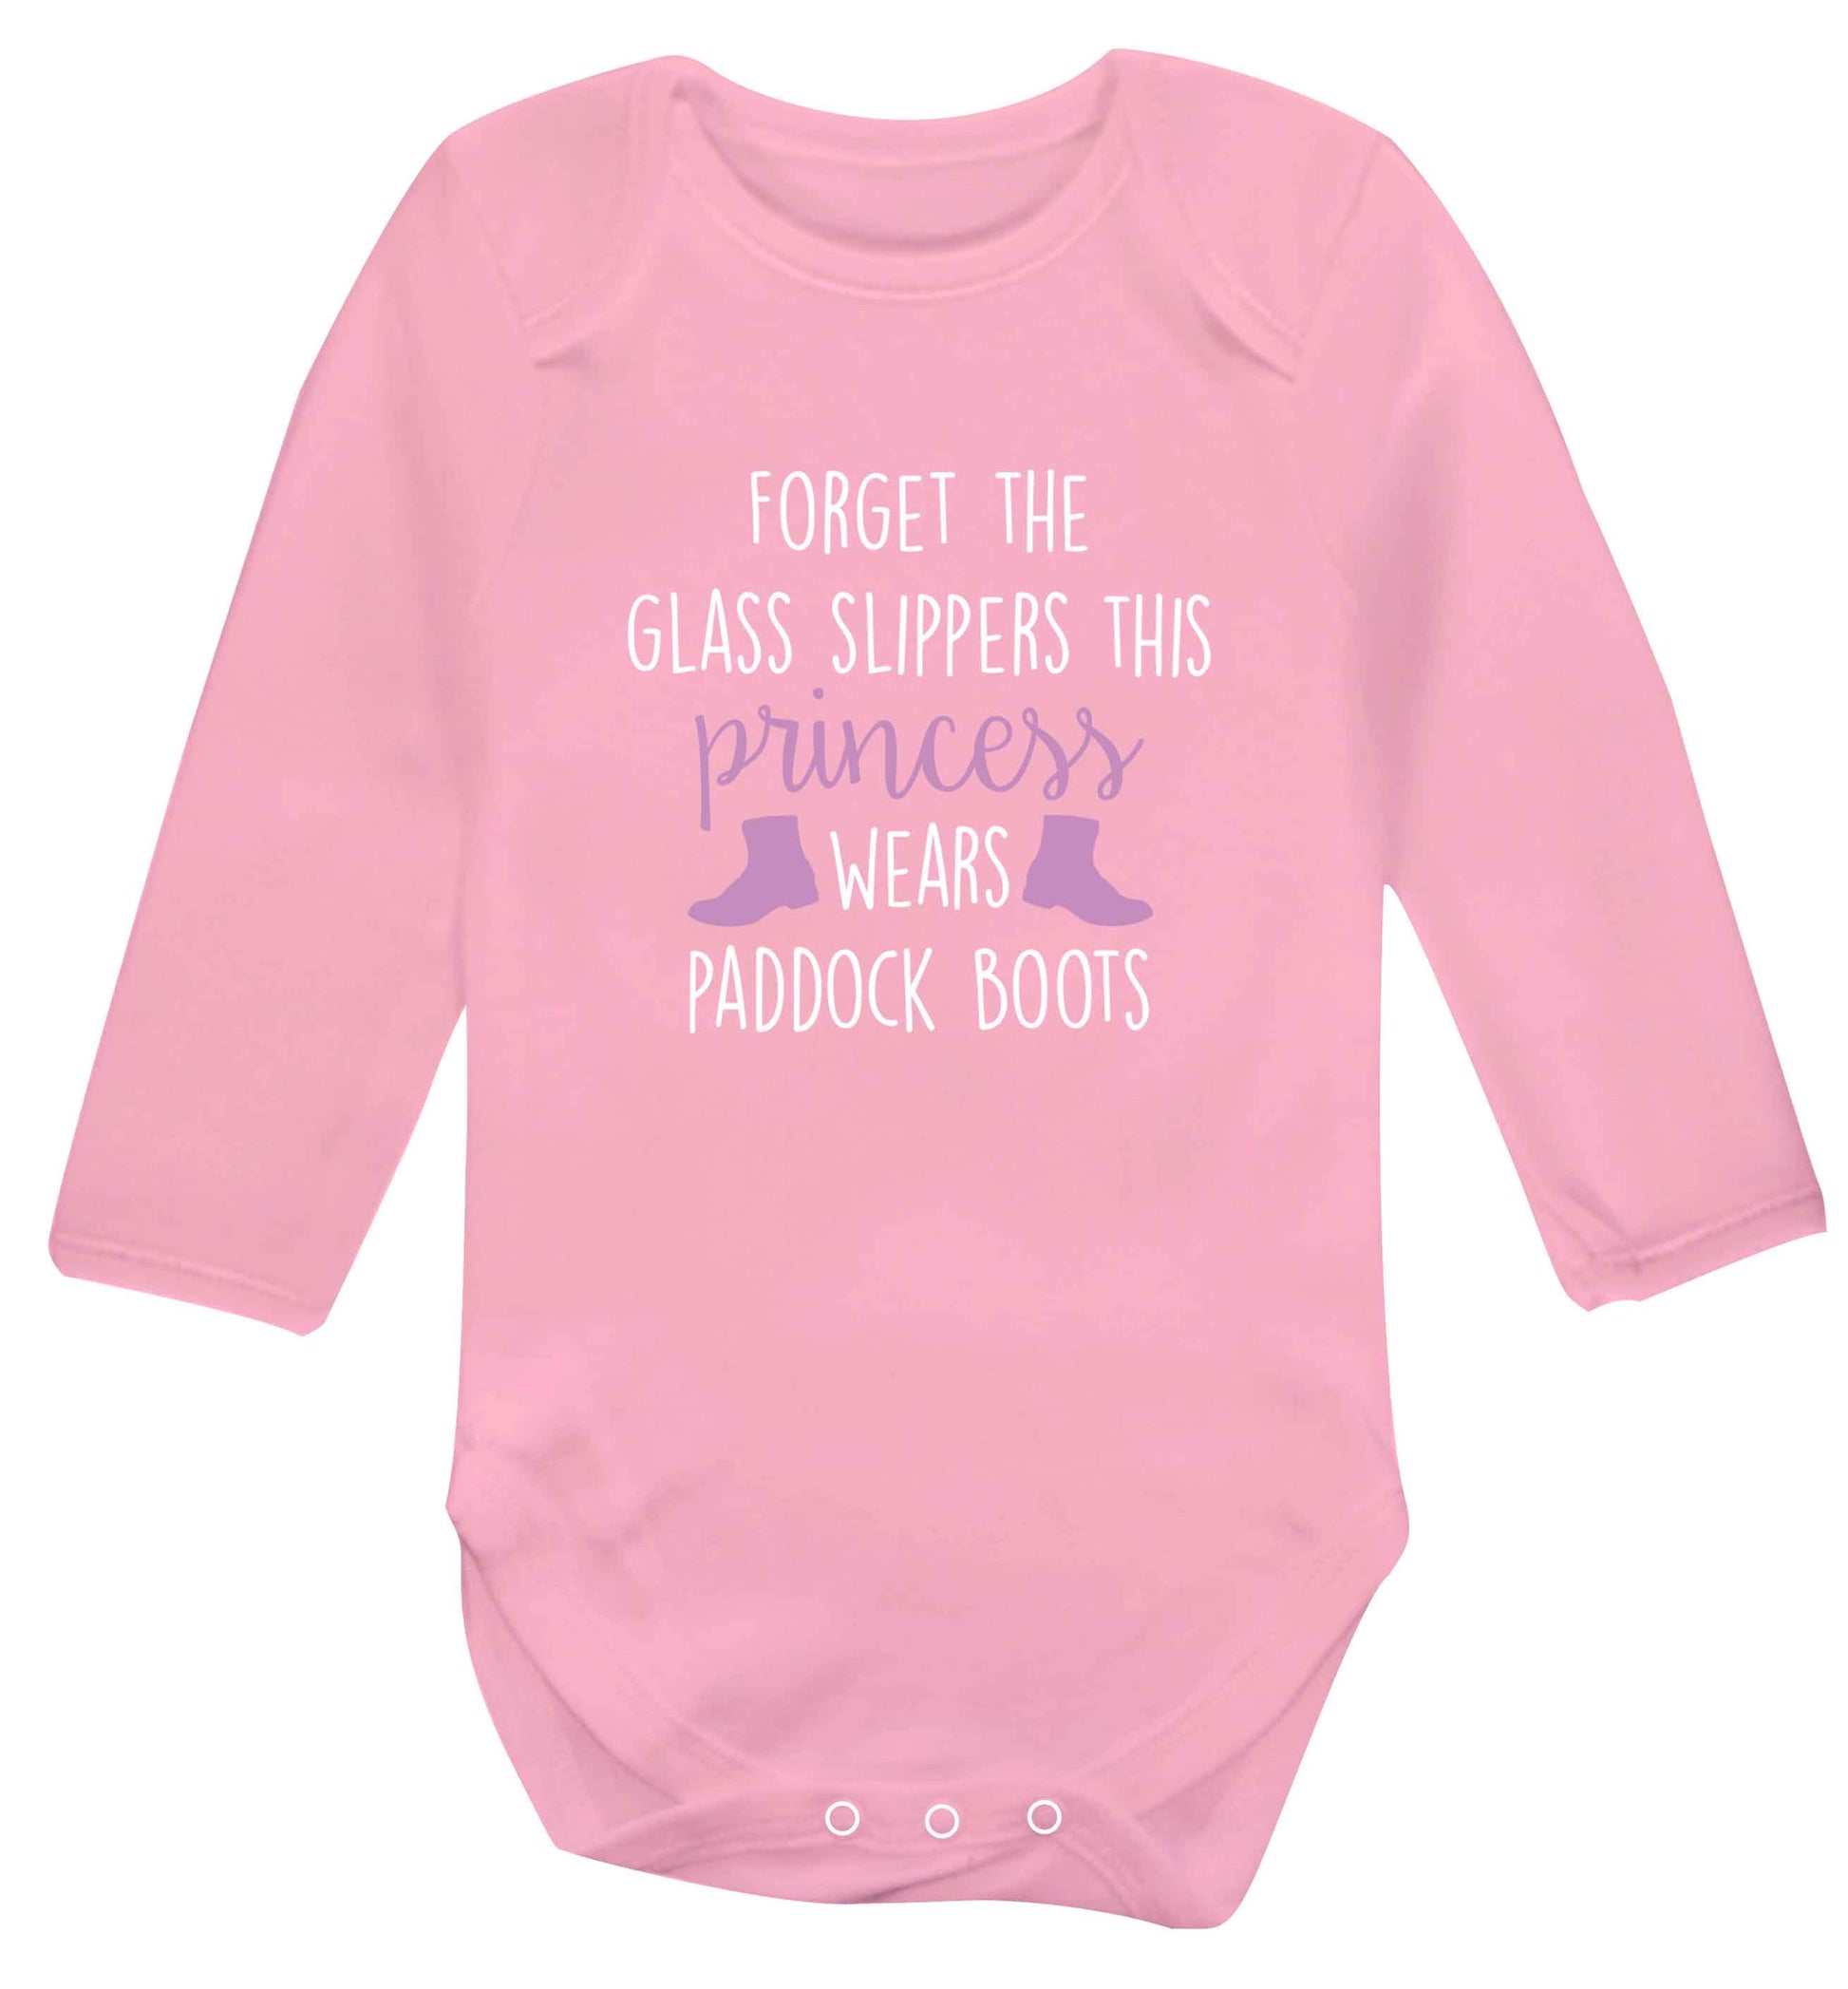 Forget the glass slippers this princess wears paddock boots baby vest long sleeved pale pink 6-12 months